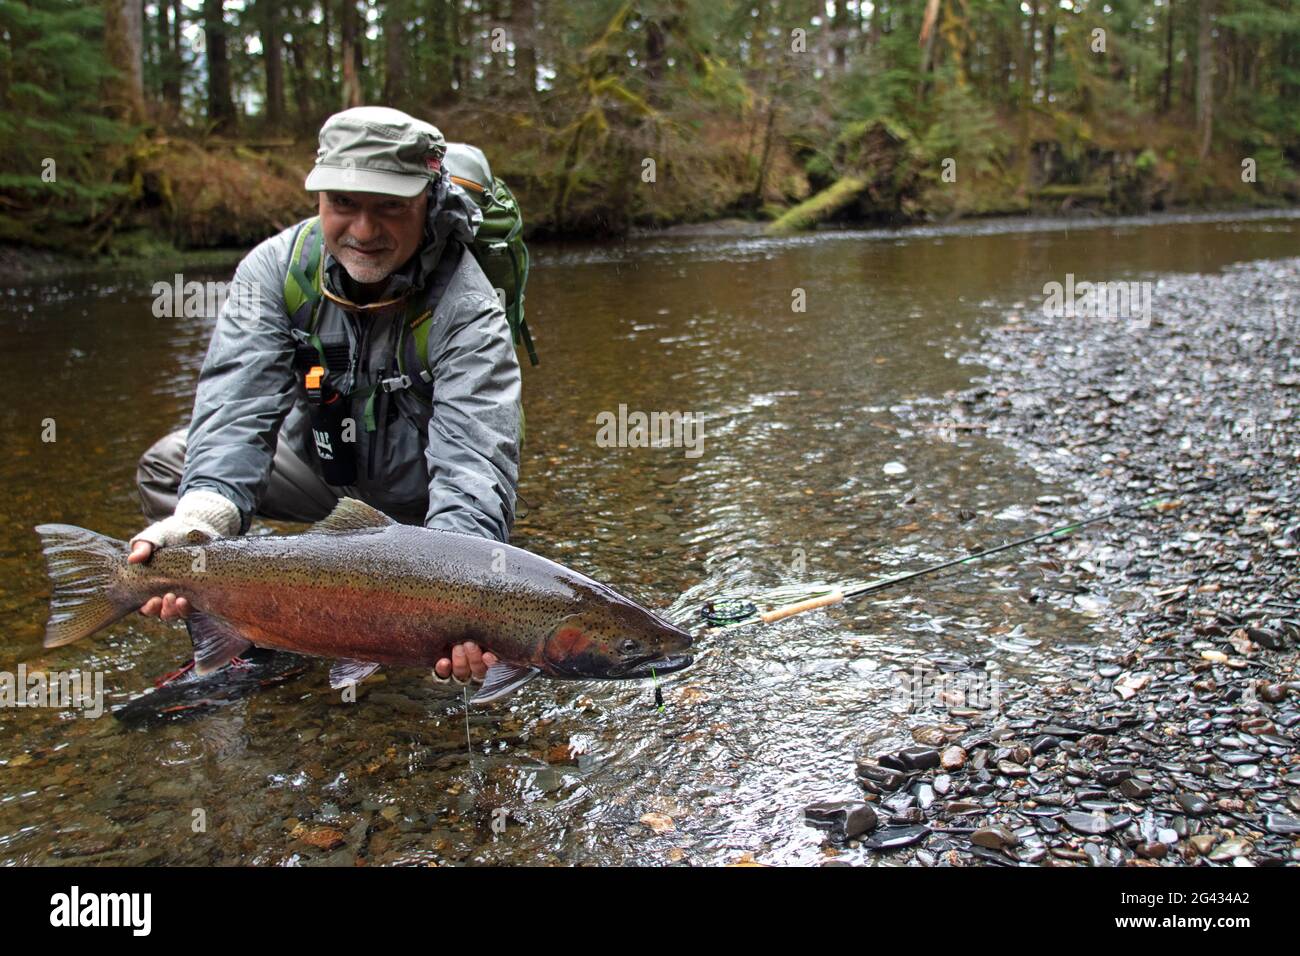 A flyfisher admires a large steelhead caught and released in one of Alaska's productive Tongass National Forest streams. Stock Photo